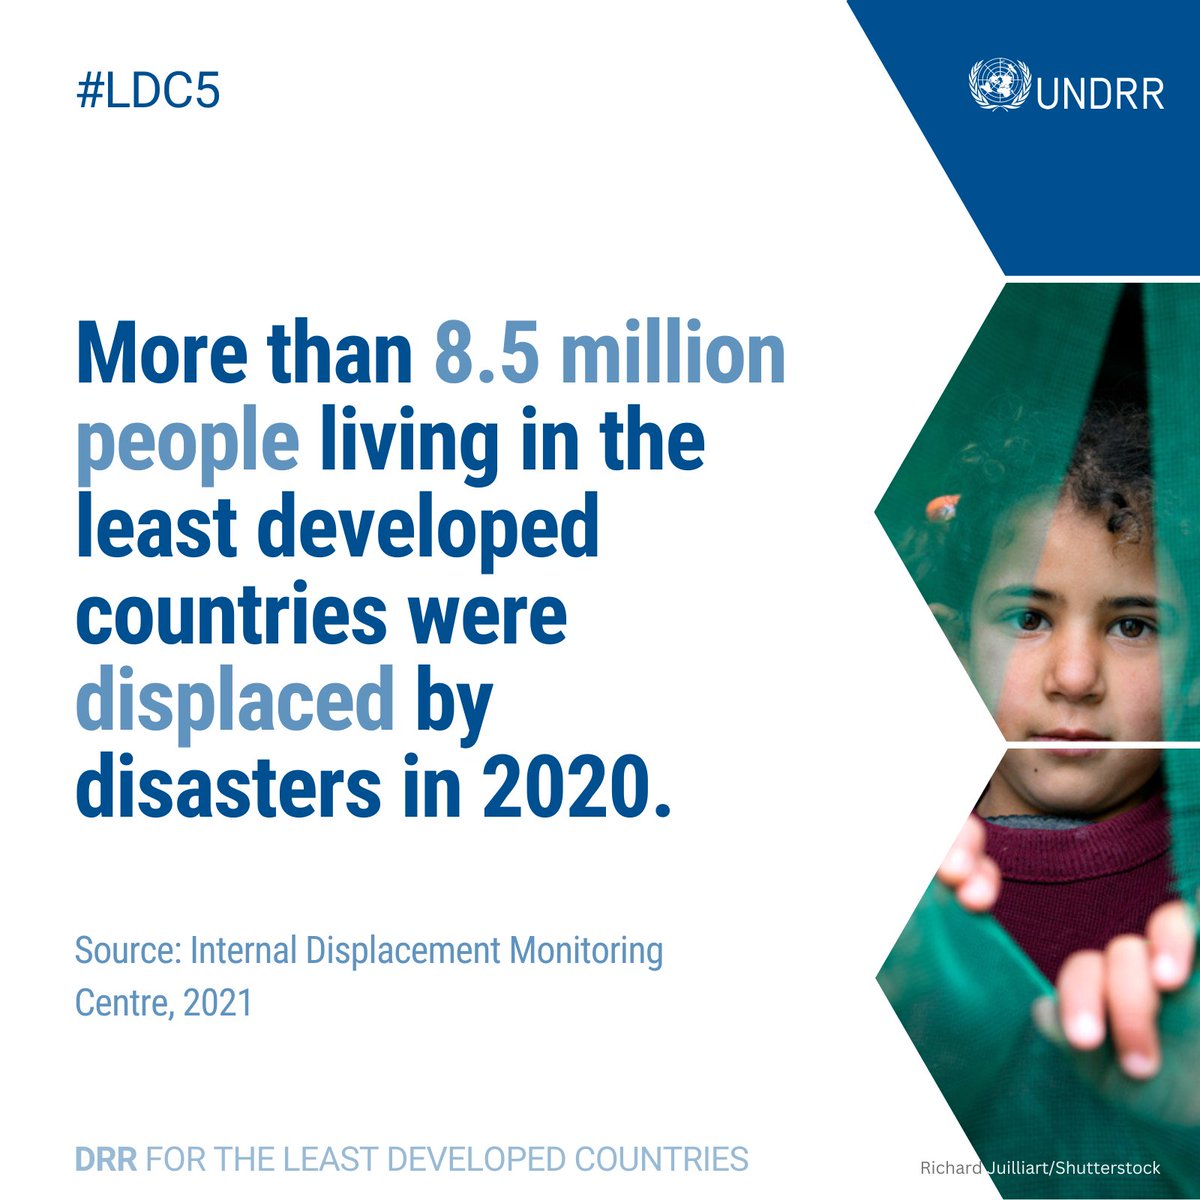 Millions of people are forced to flee their homes each year because of disasters – those in the least developed countries suffer most. Investing in resilience can help reduce displacement and suffering. ow.ly/EW0450N65lk